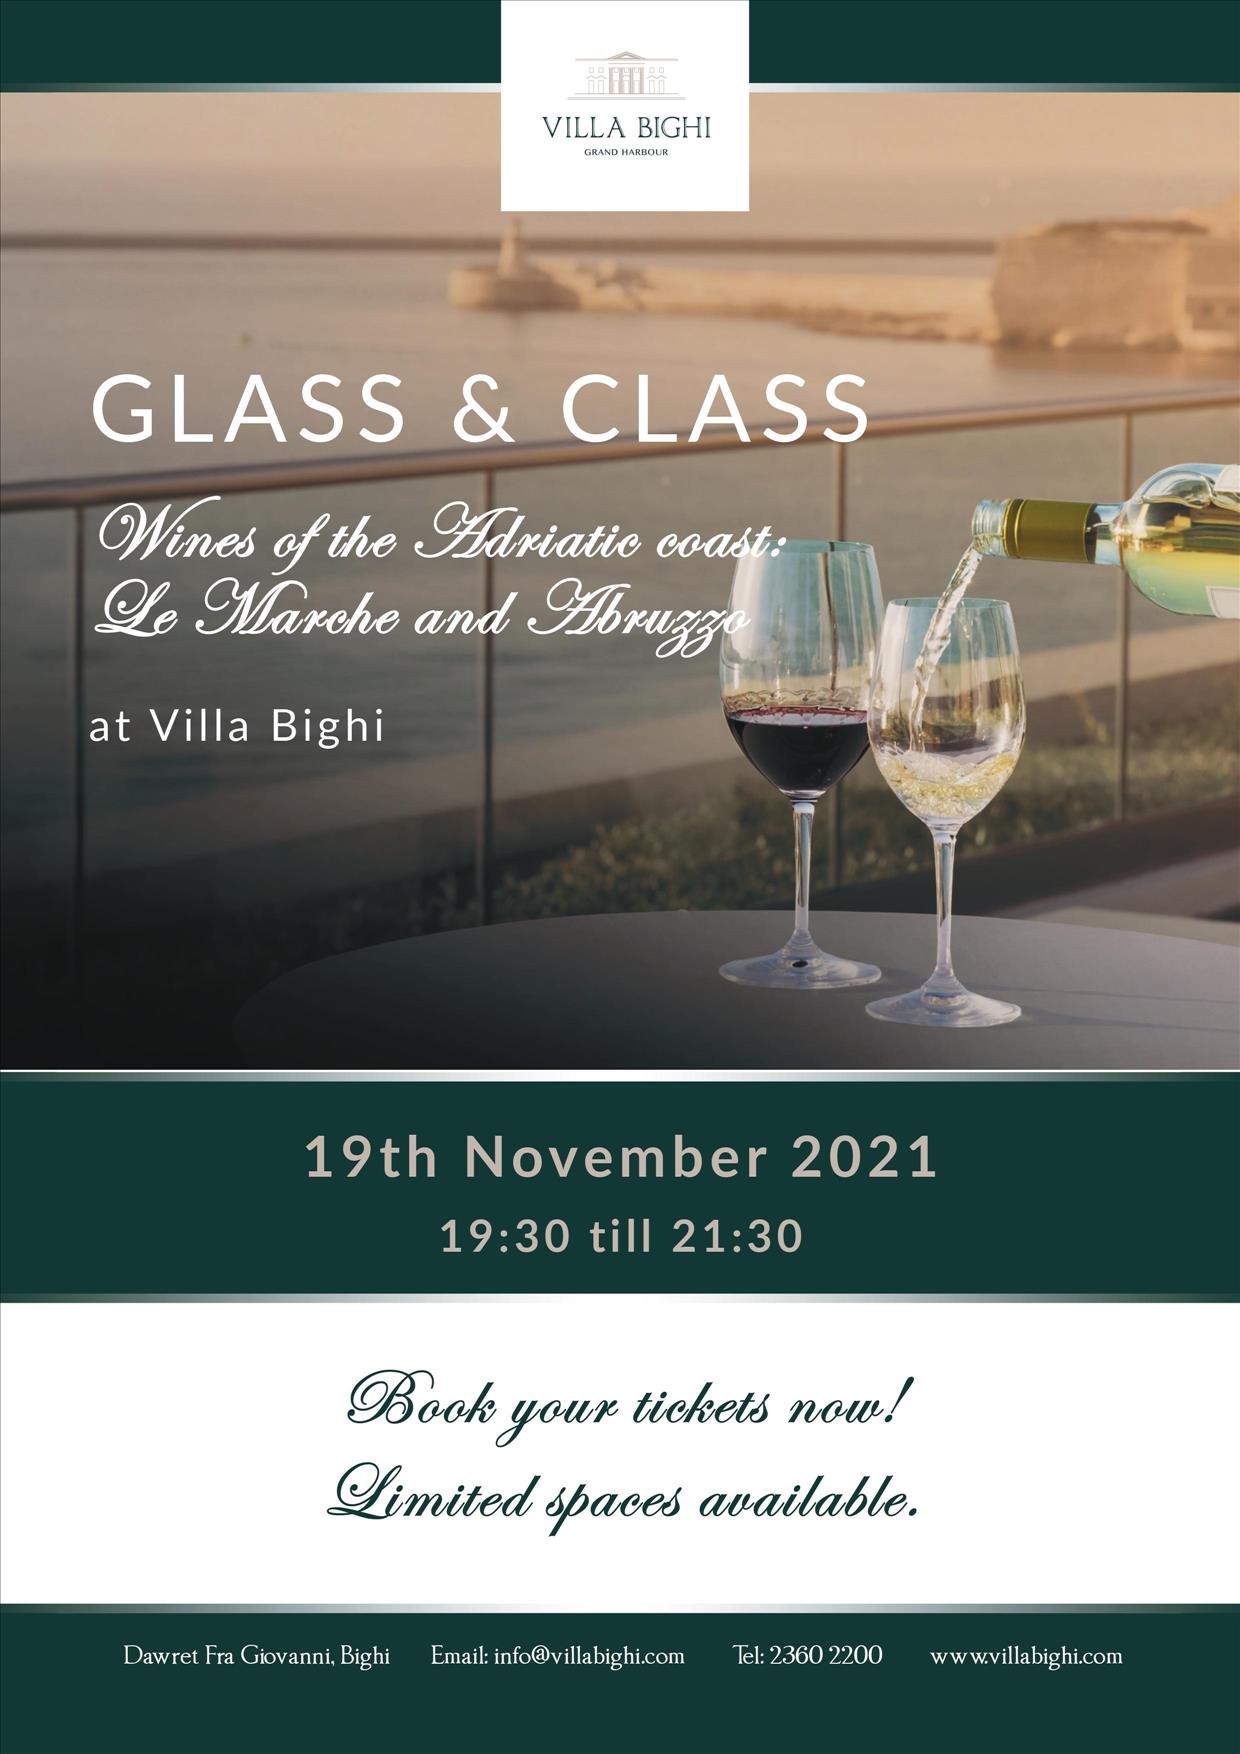 Glass & Class: Glass & Class: The Wines of the Adriatic Coast poster